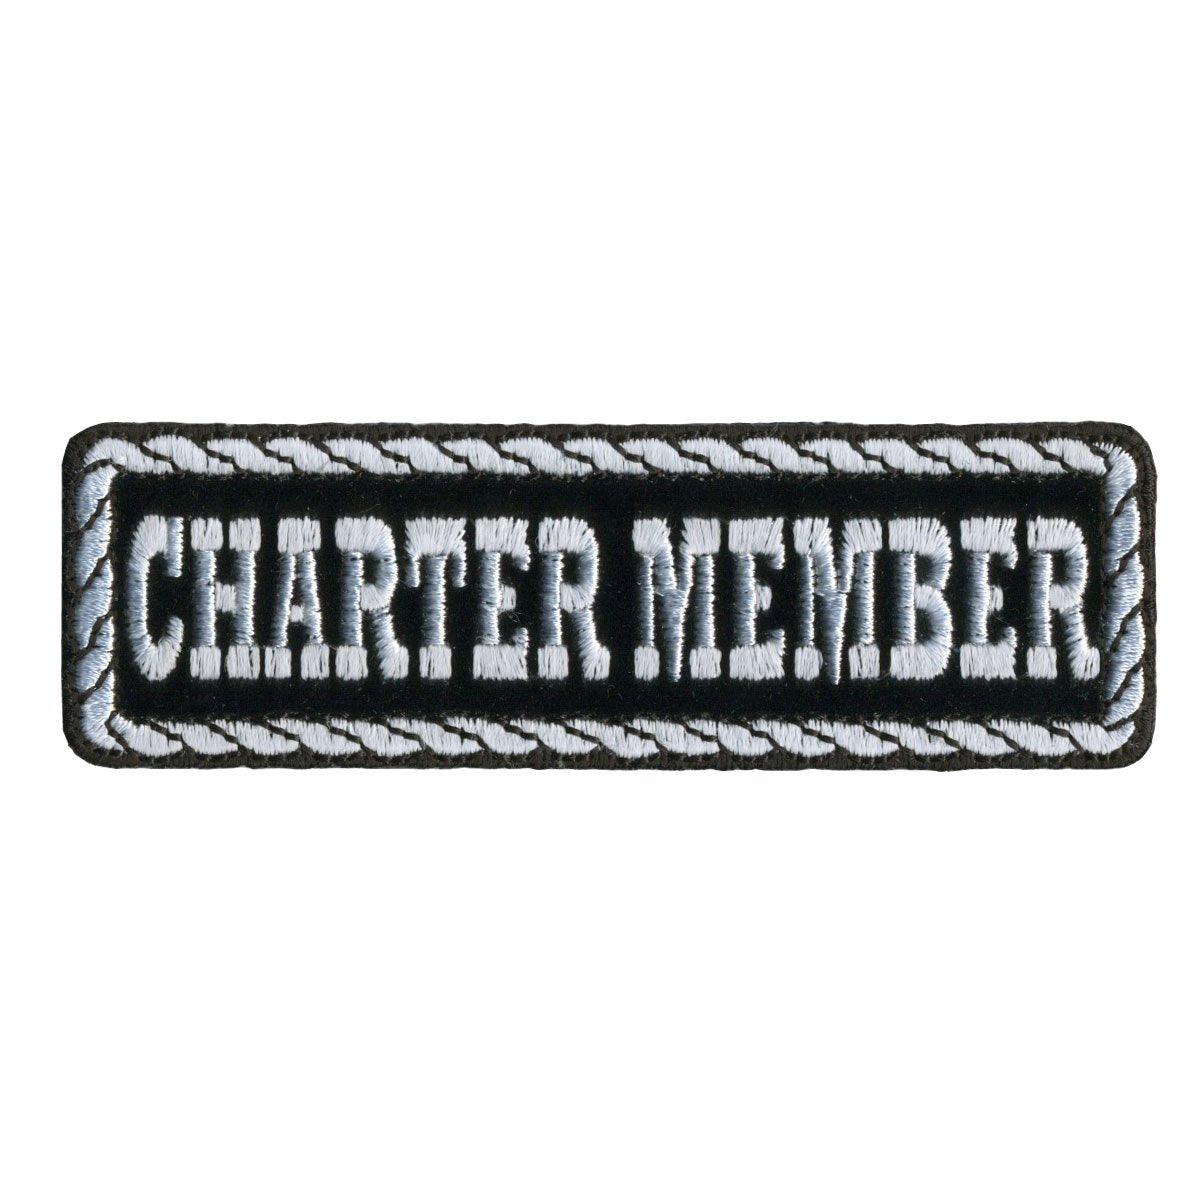 Hot Leathers Charter Member 4" X 1" Patch - American Legend Rider